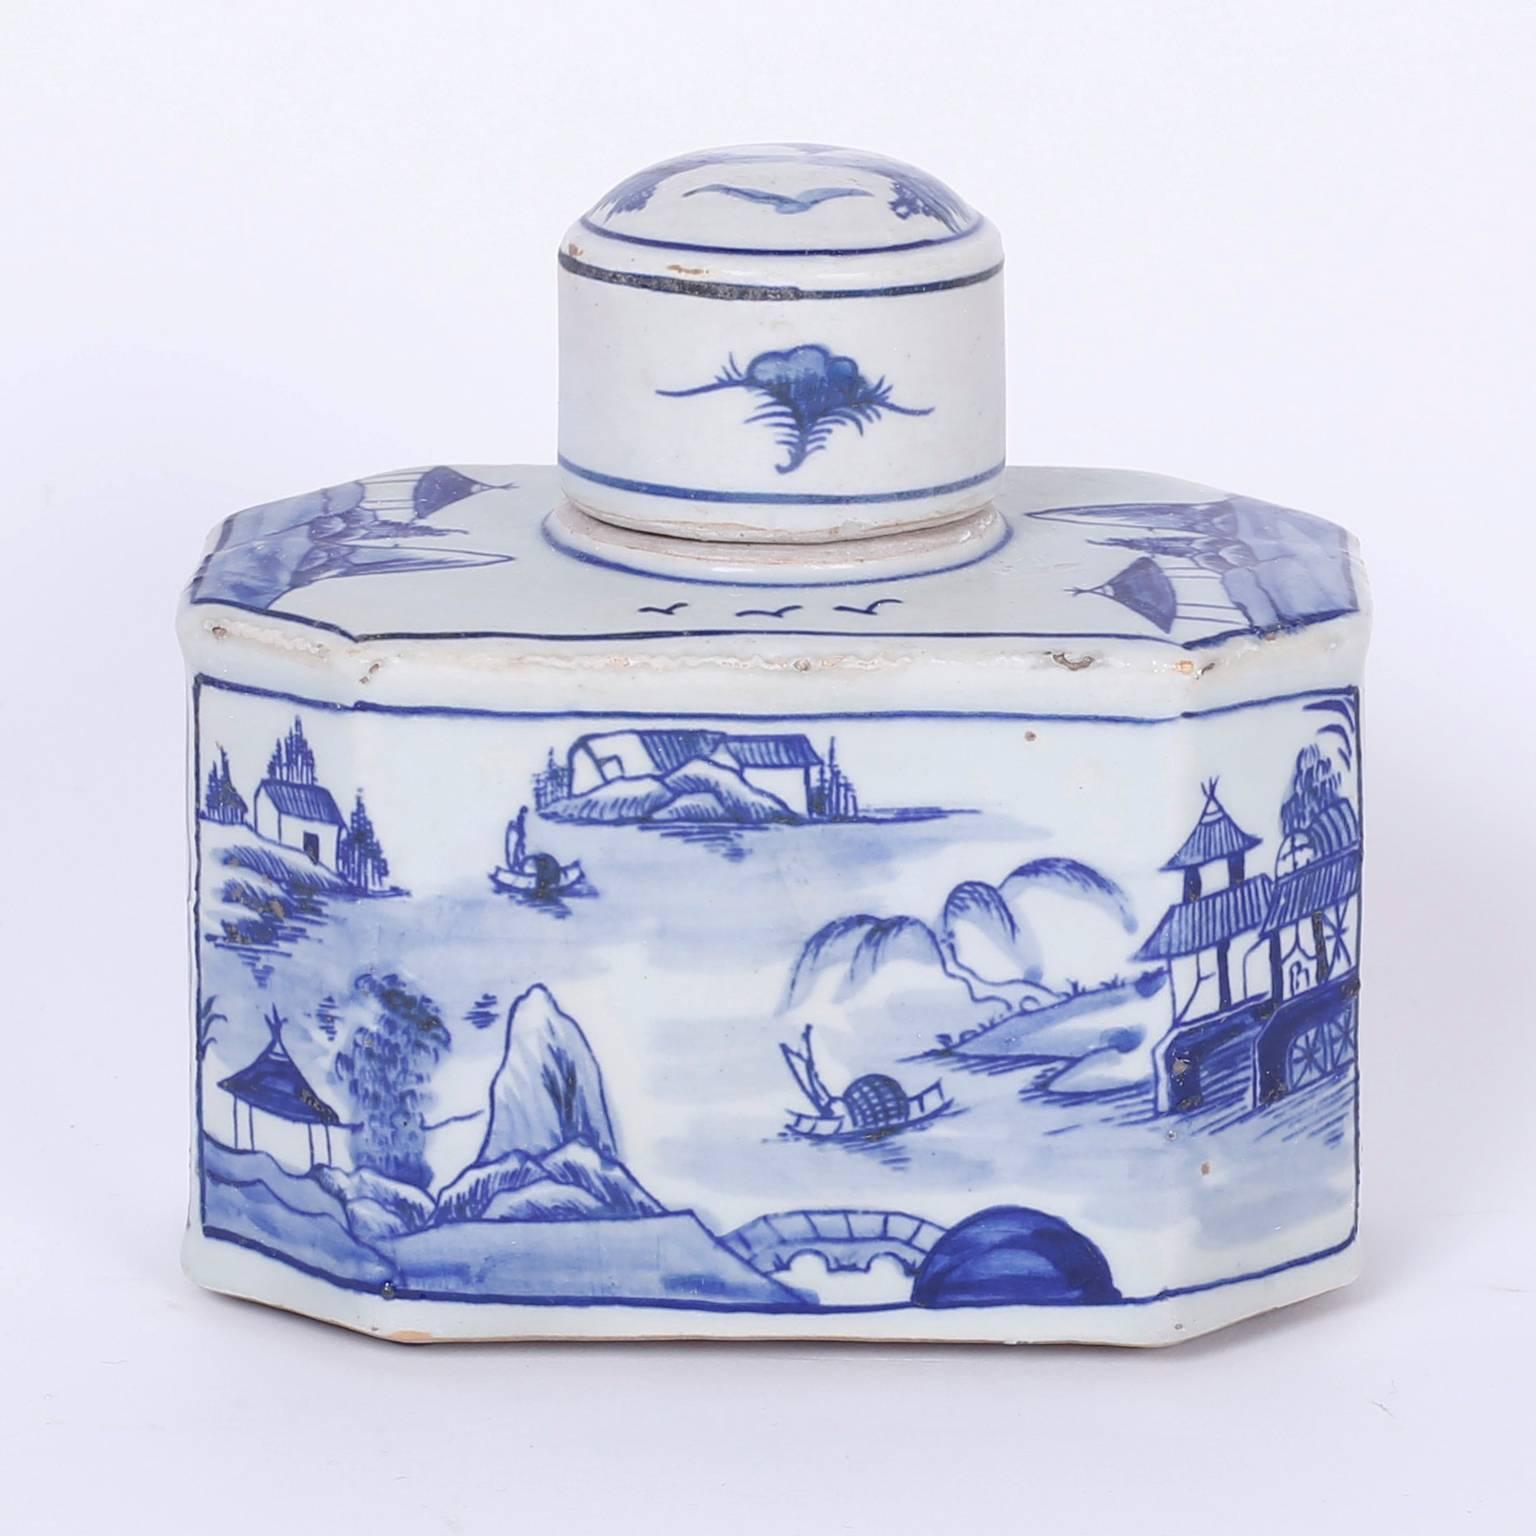 Pair of blue and white Chinese porcelain tea containers with an unusual geometric form and hand decorated water way scenes with boats, bridges, and architecture, in the Canton manner.